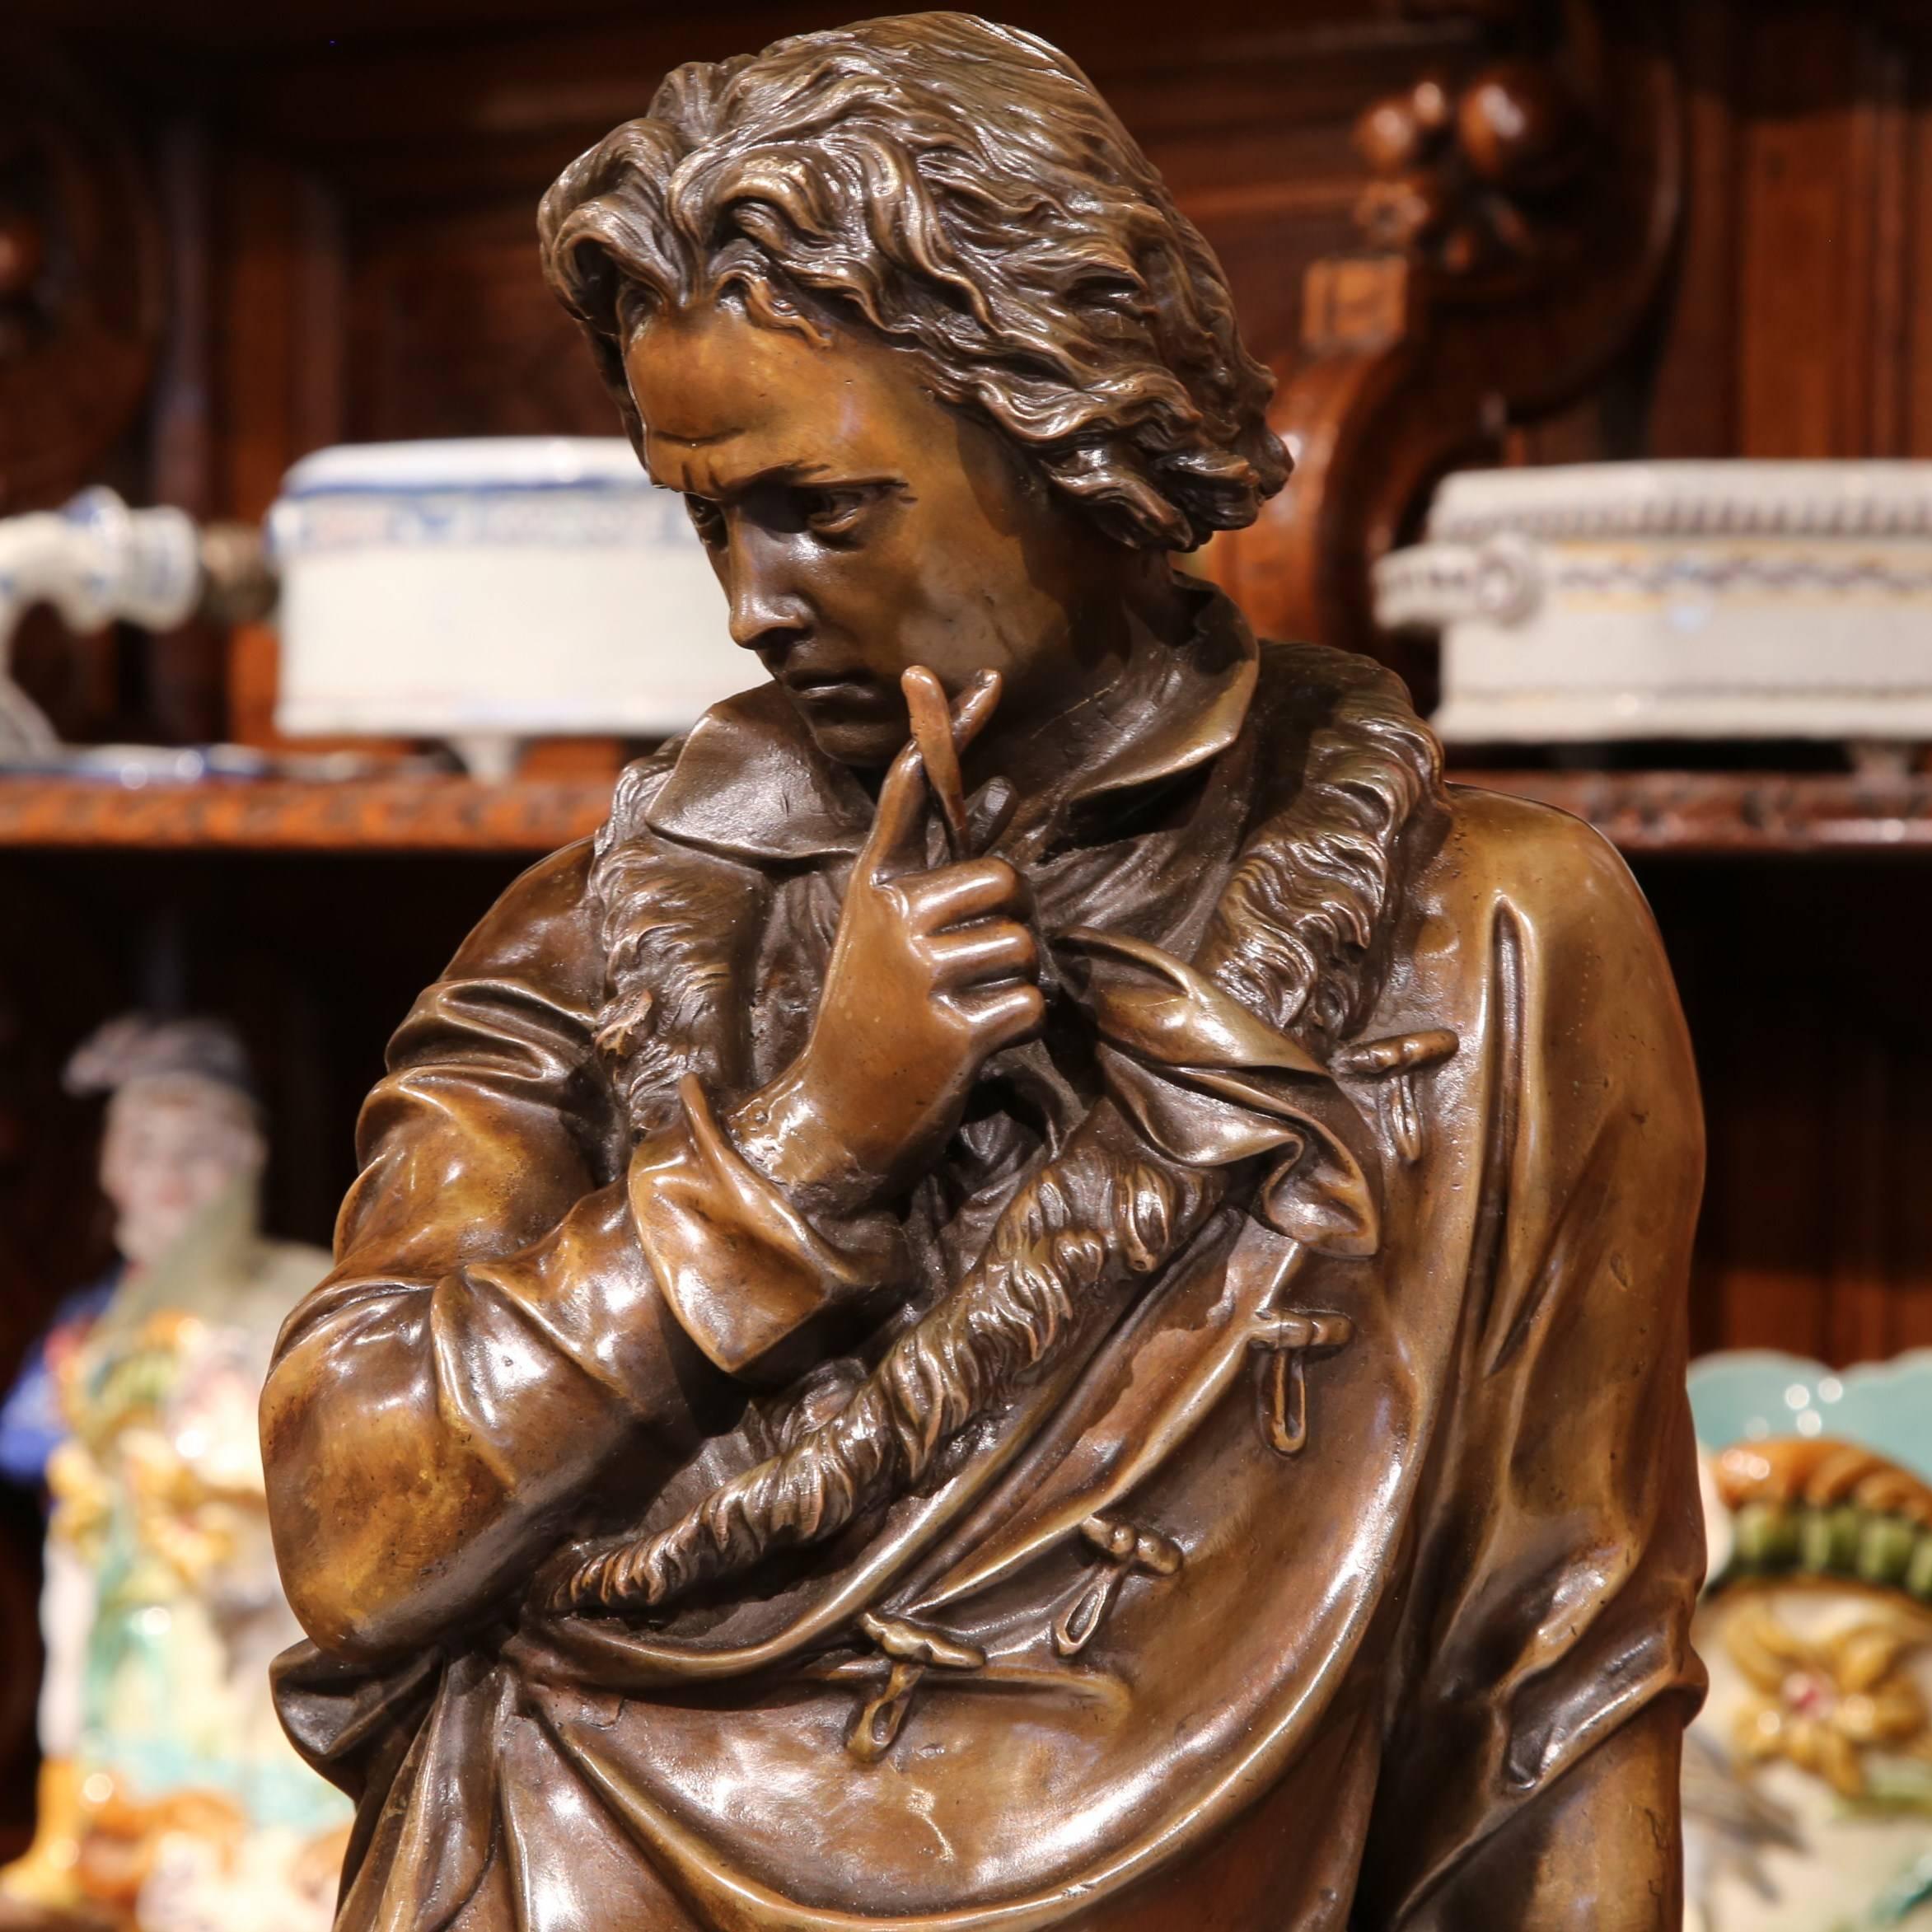 This tall antique bronze sculpture was crafted in France, circa 1850. The large piece depicts the composer, pianist, and musical genius Ludwig Van Beethoven, and was created in the style of the French sculptor Andre Trupheme (1820-1888). The elegant